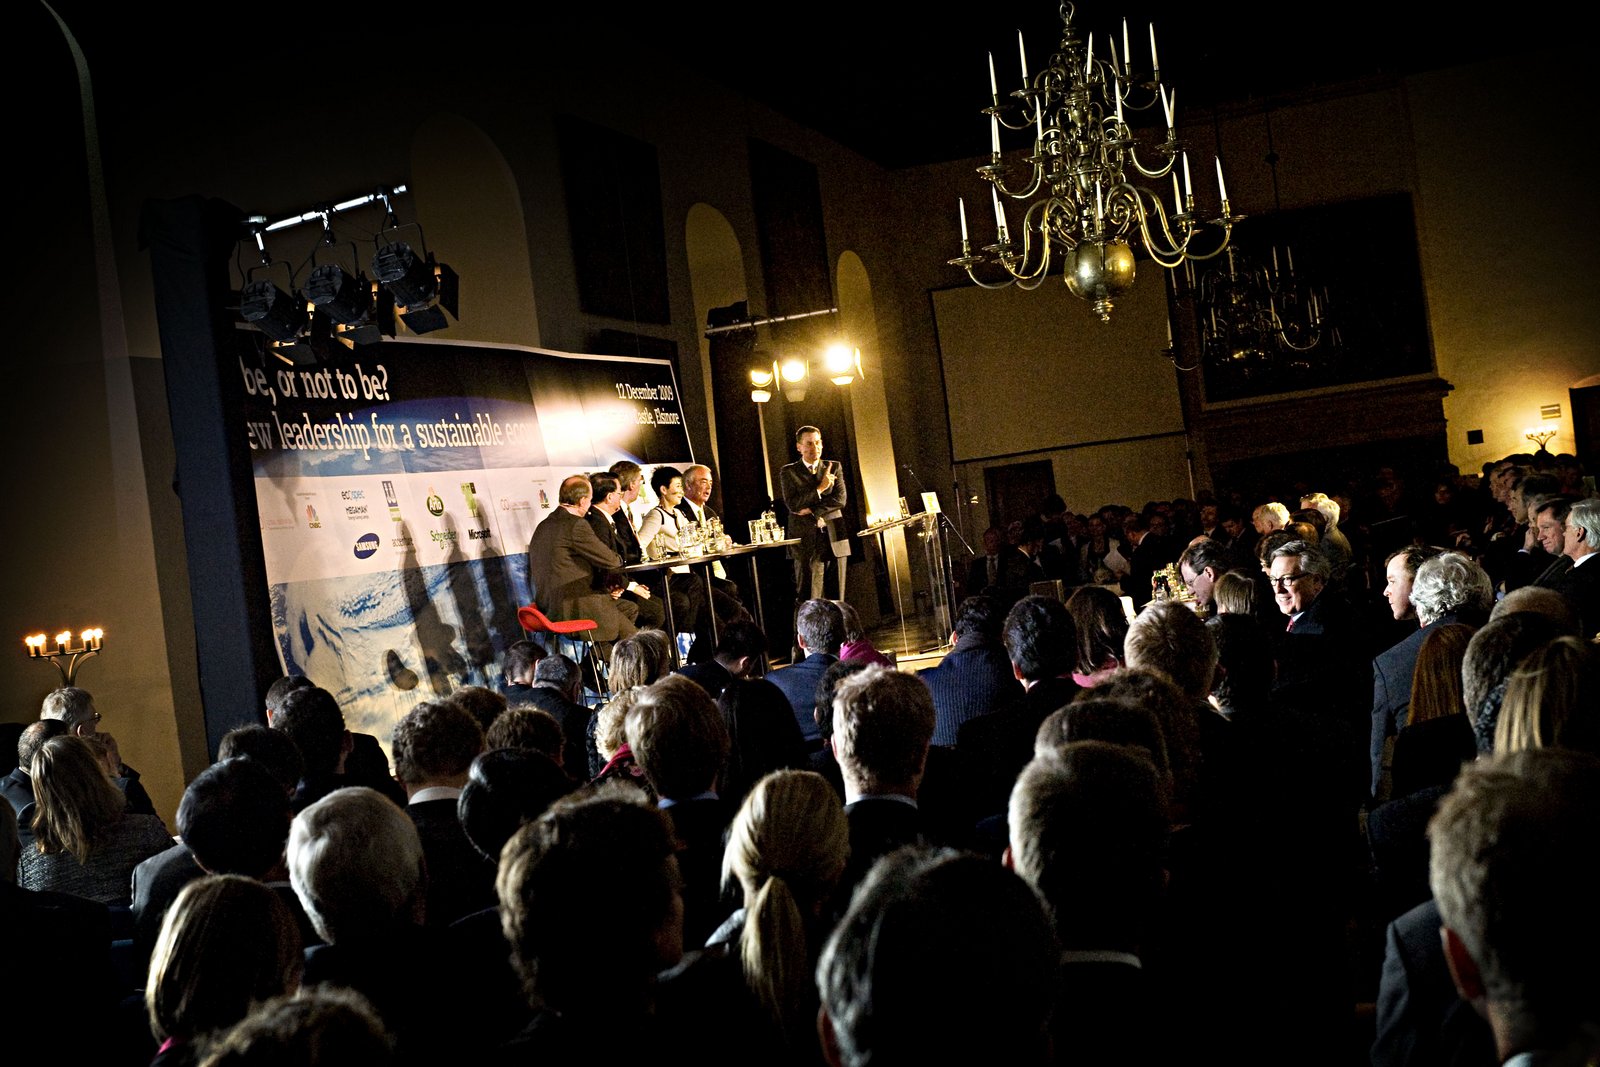 CCC Event at the Kronborg Castle during the COP15